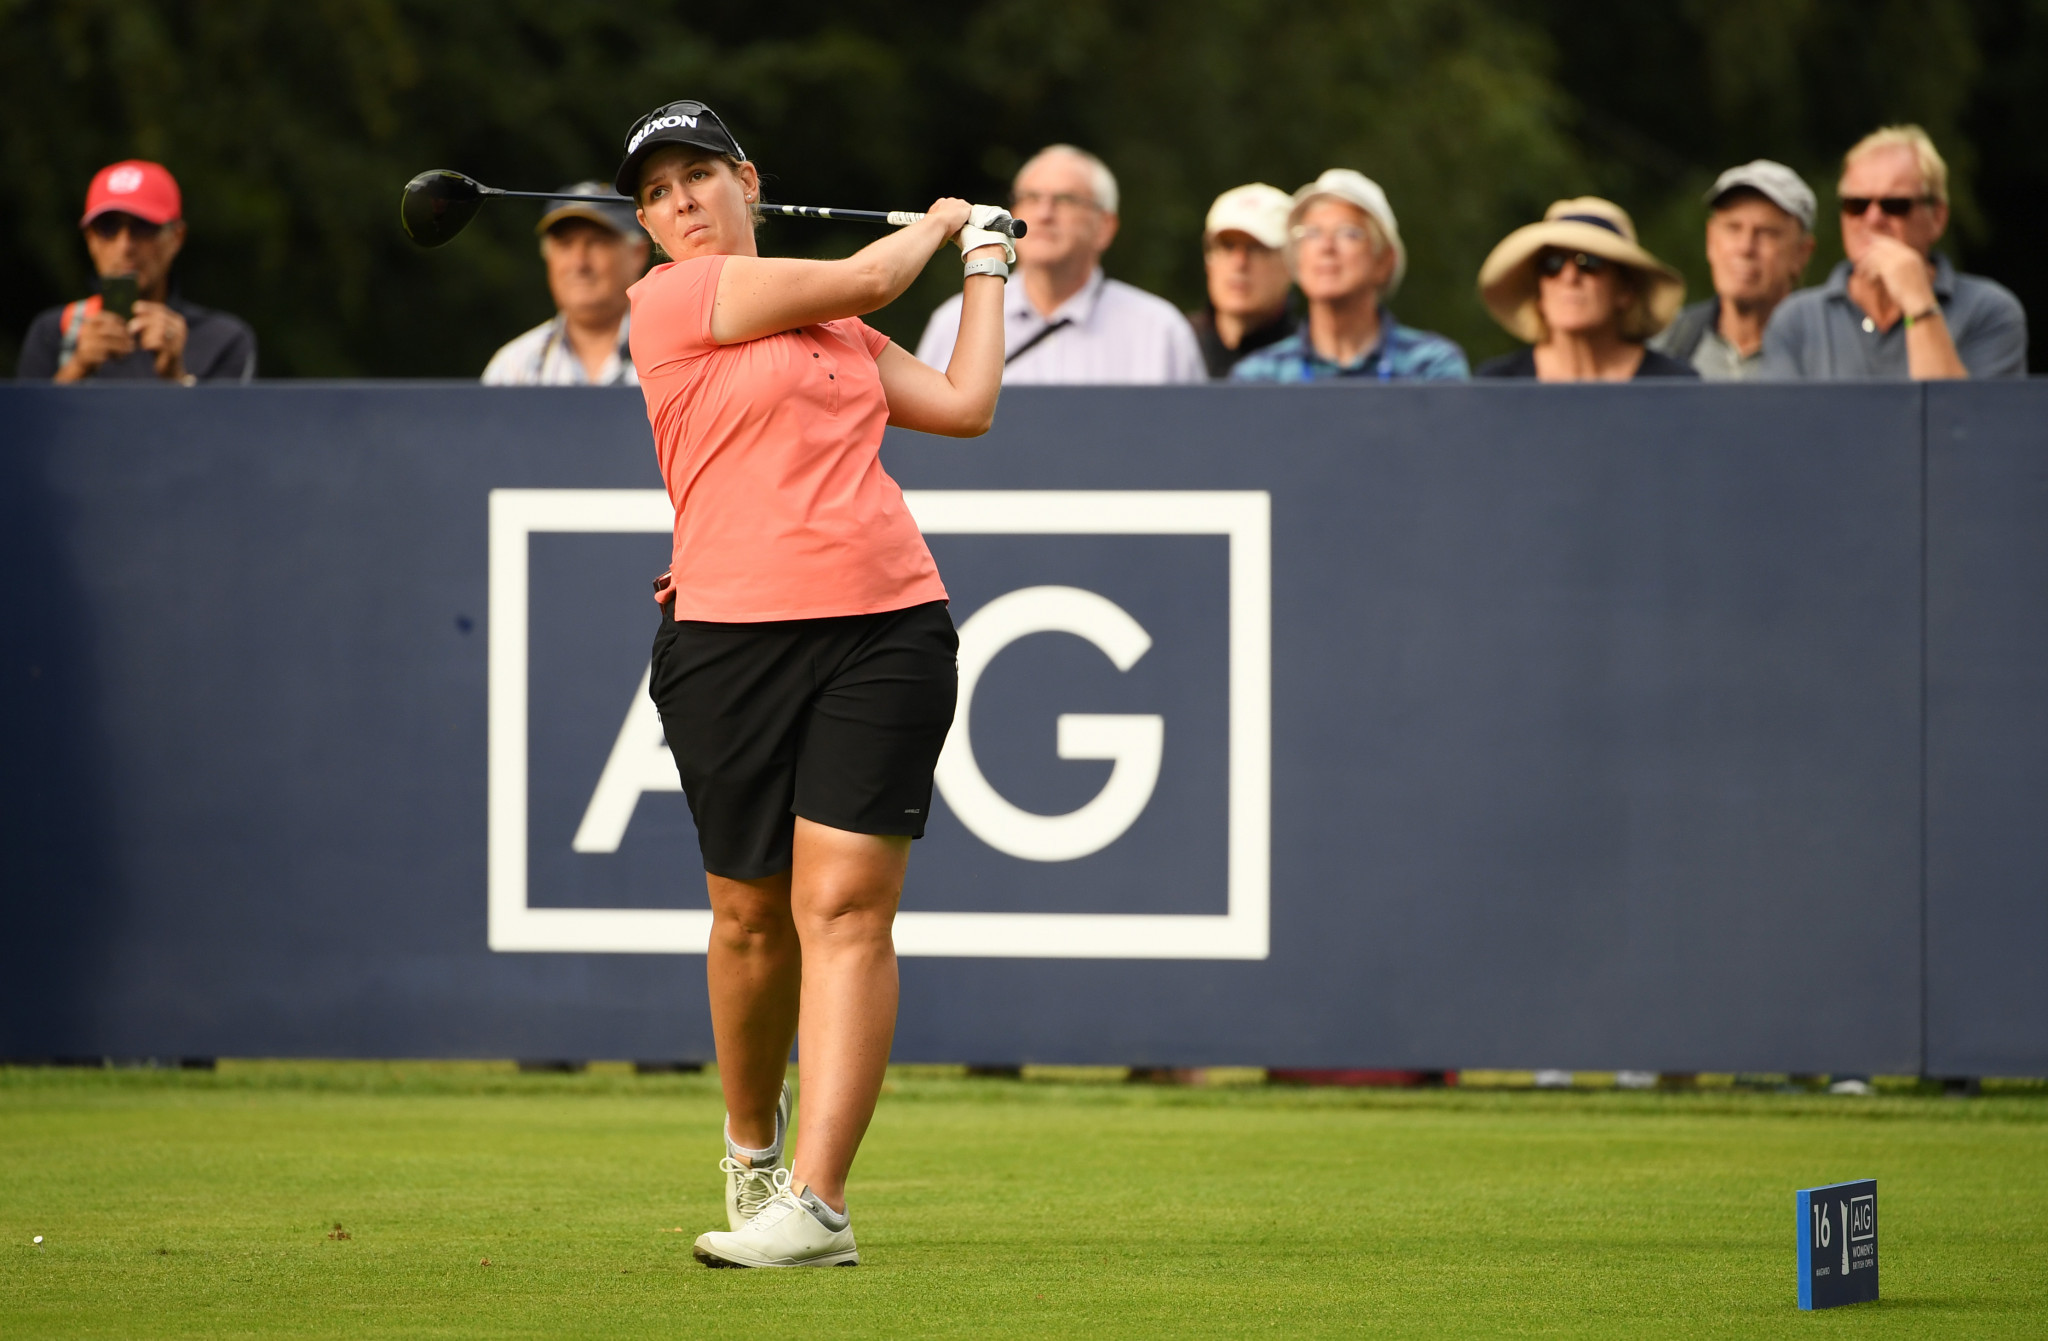 Buhai extends lead at Women's British Open after another strong round